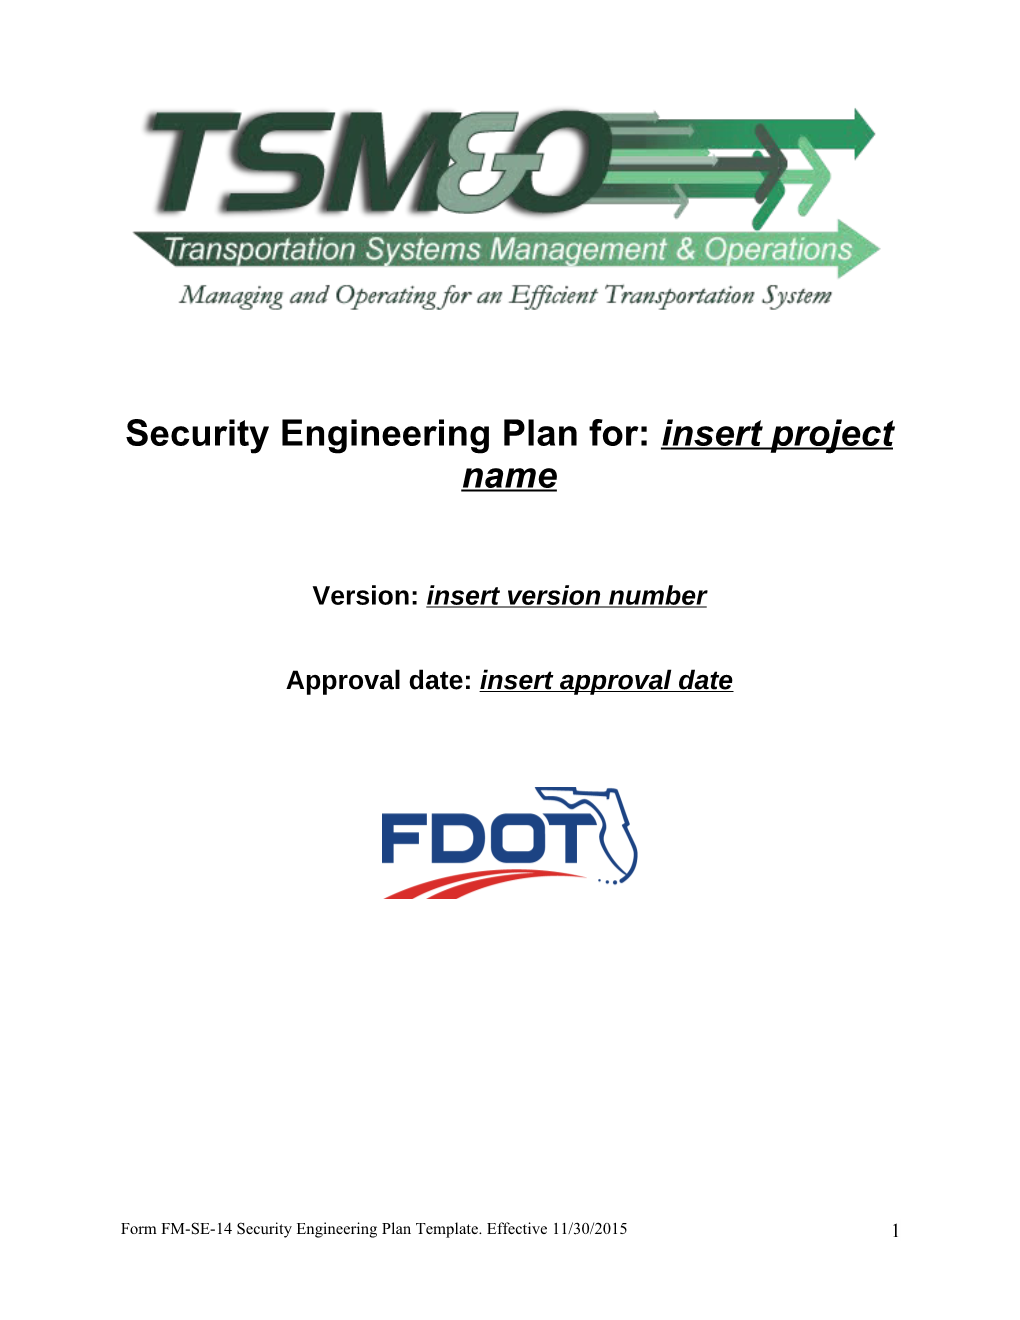 Security Engineering Plan For:Insert Project Name